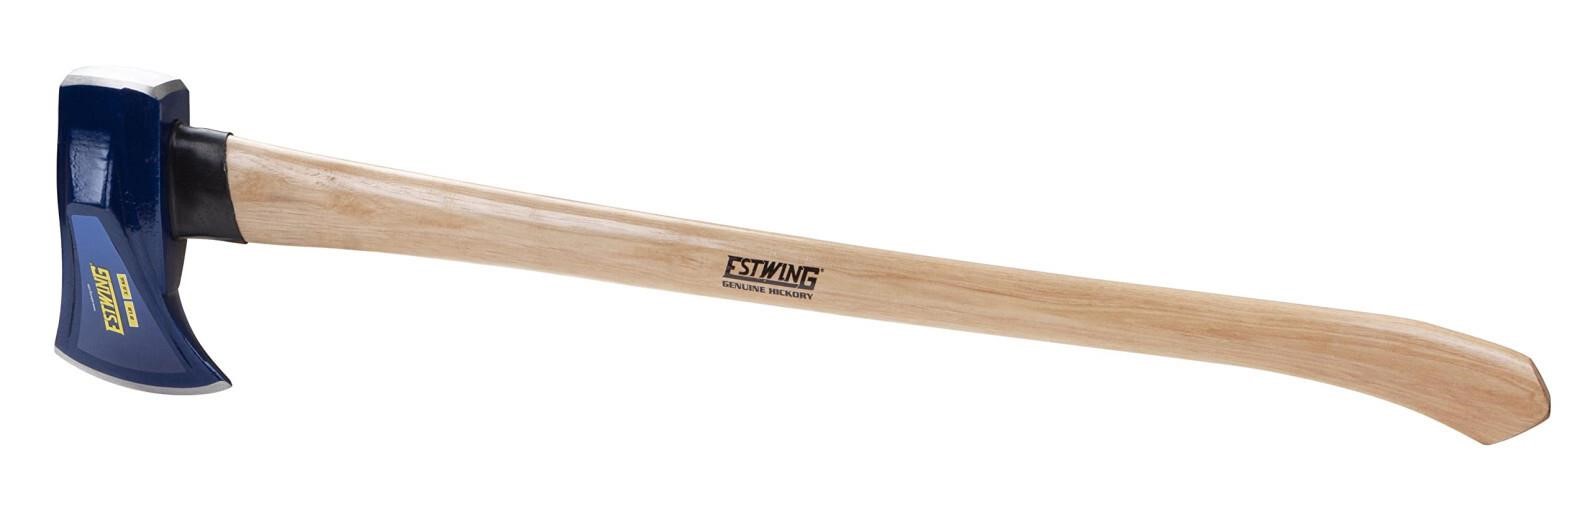 Estwing 8 Pound Wood Splitting Maul Tool with 36 I